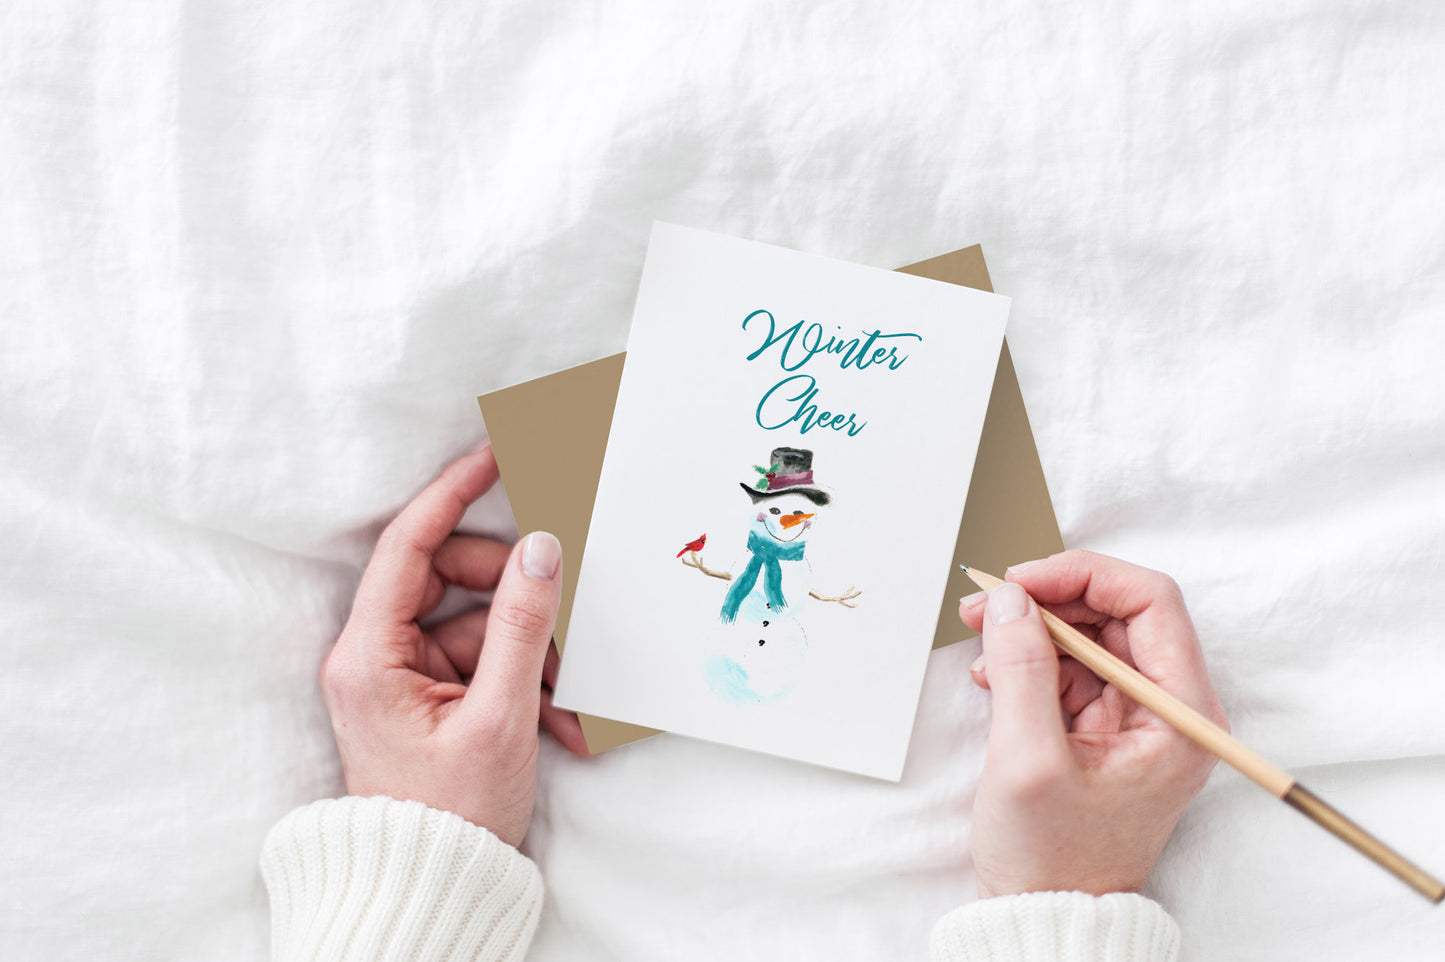 merry christmas greetings for friends | winter cheer holiday card